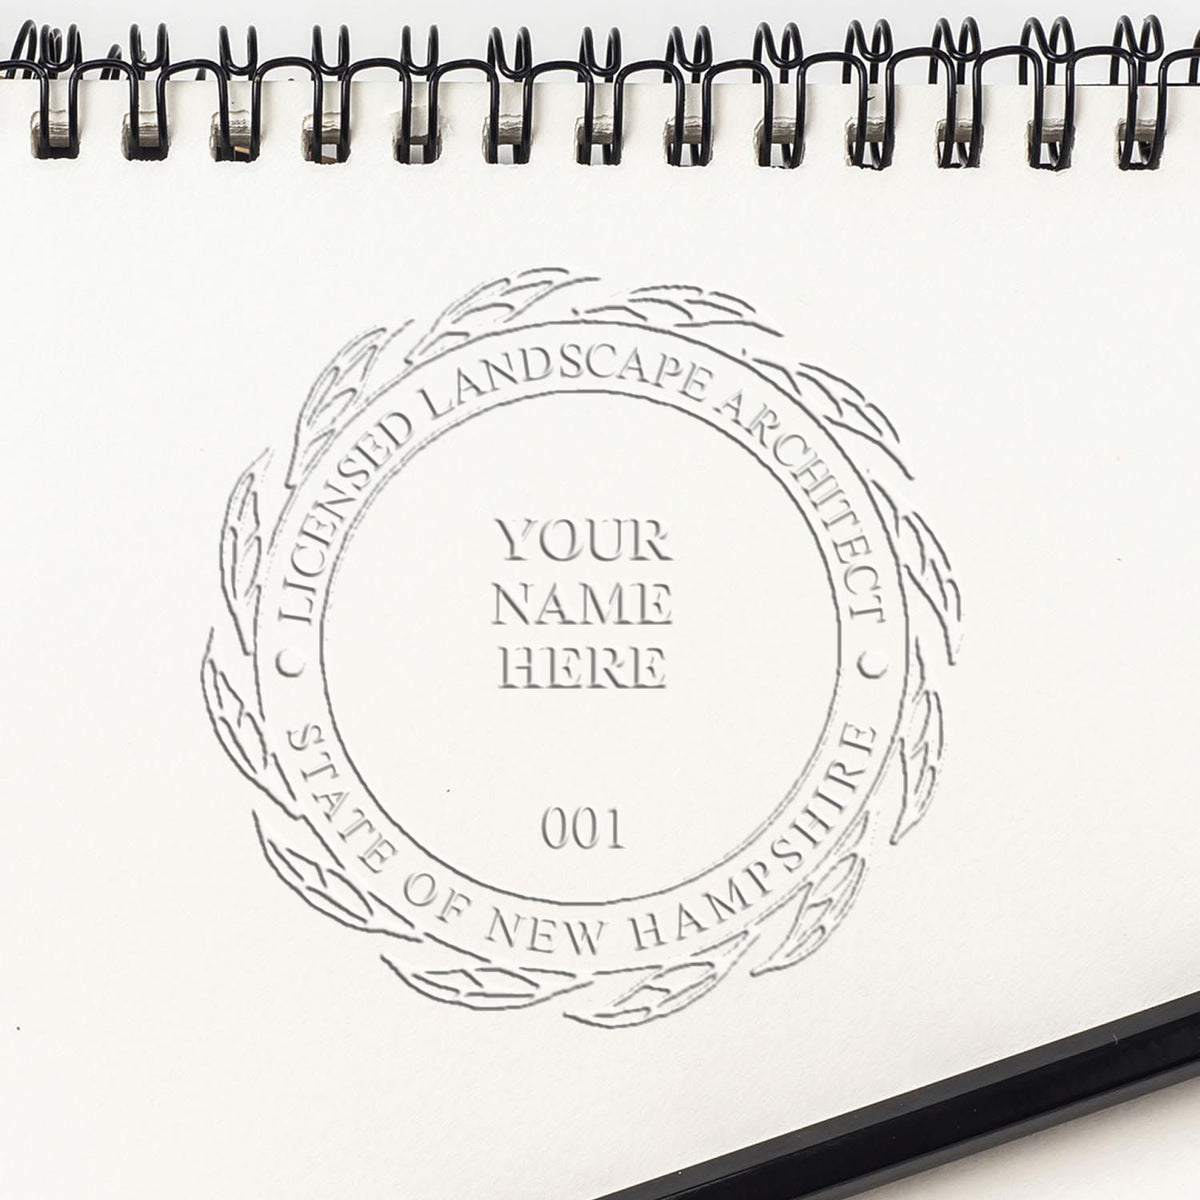 A photograph of the Hybrid New Hampshire Landscape Architect Seal stamp impression reveals a vivid, professional image of the on paper.